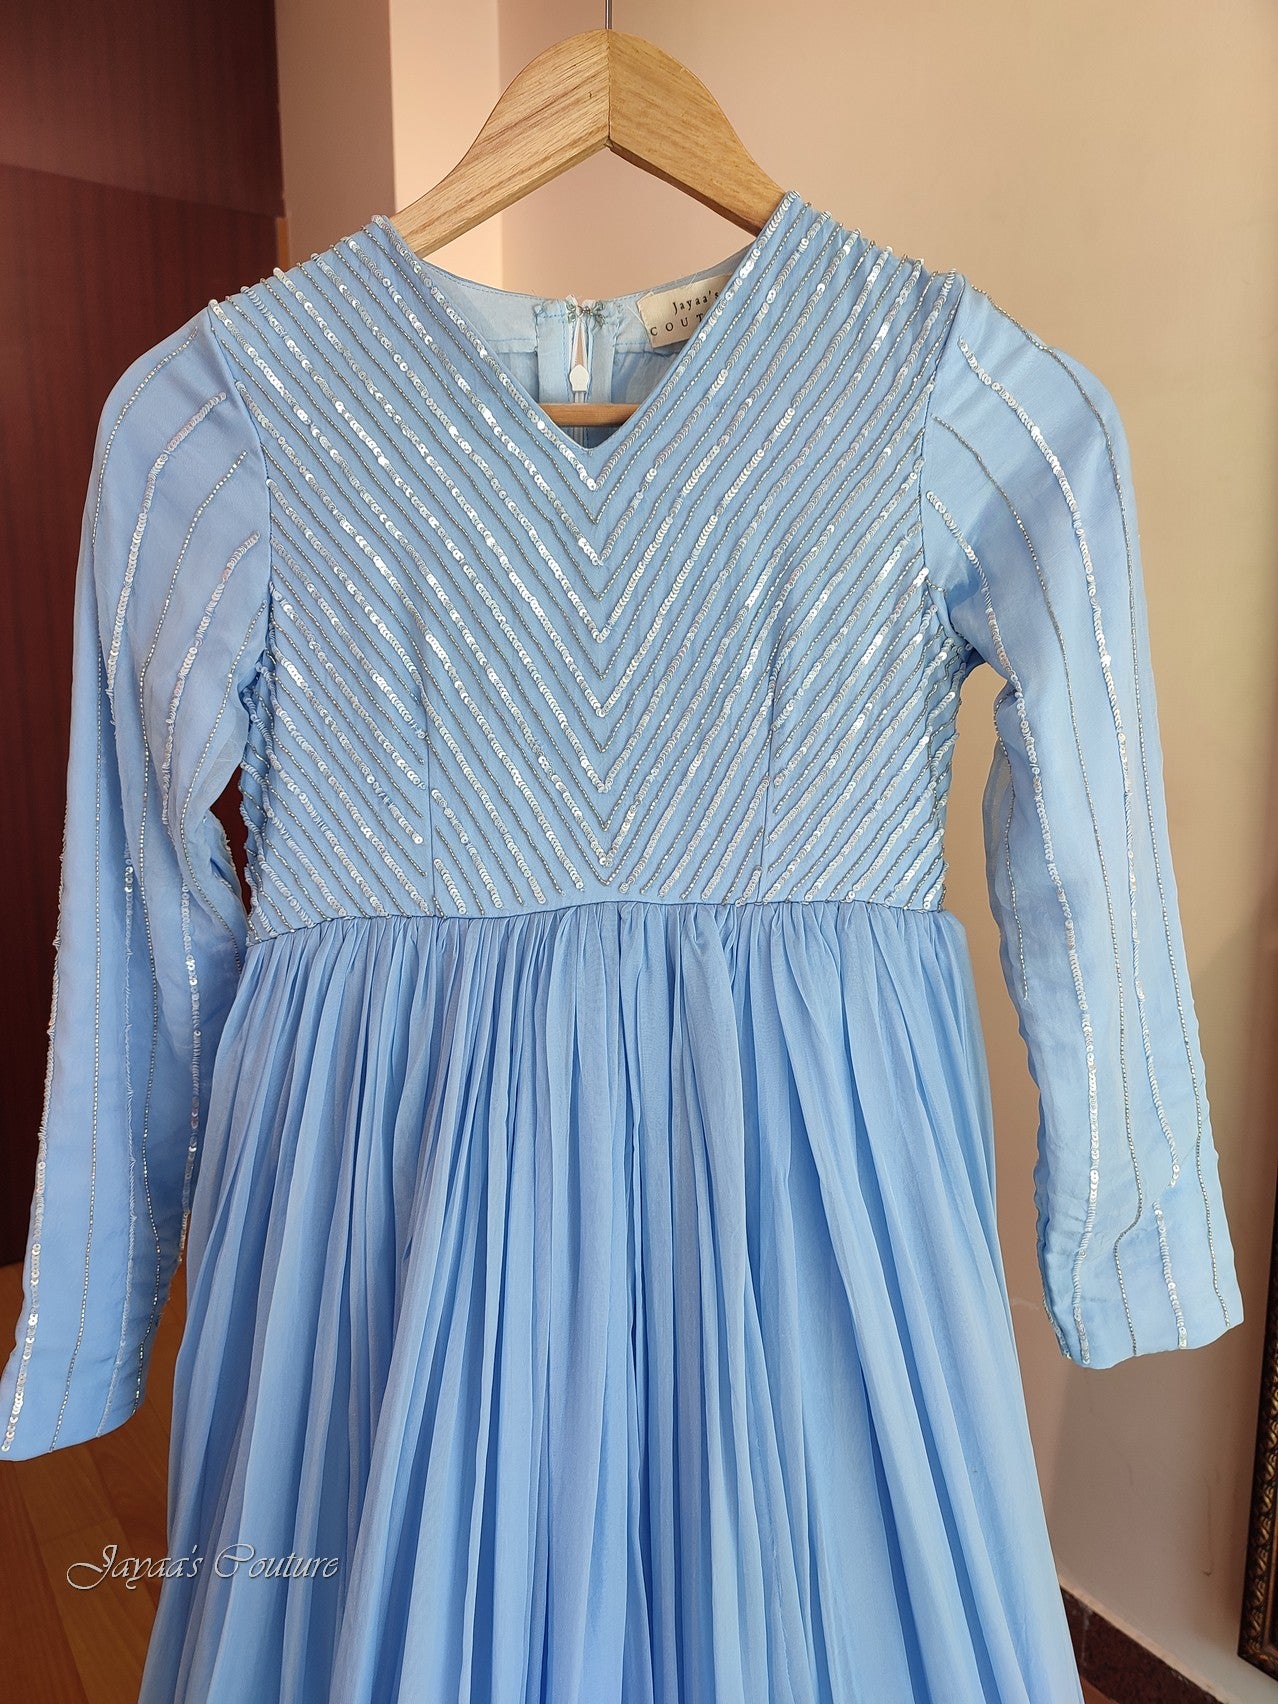 Powder blue pleated gown